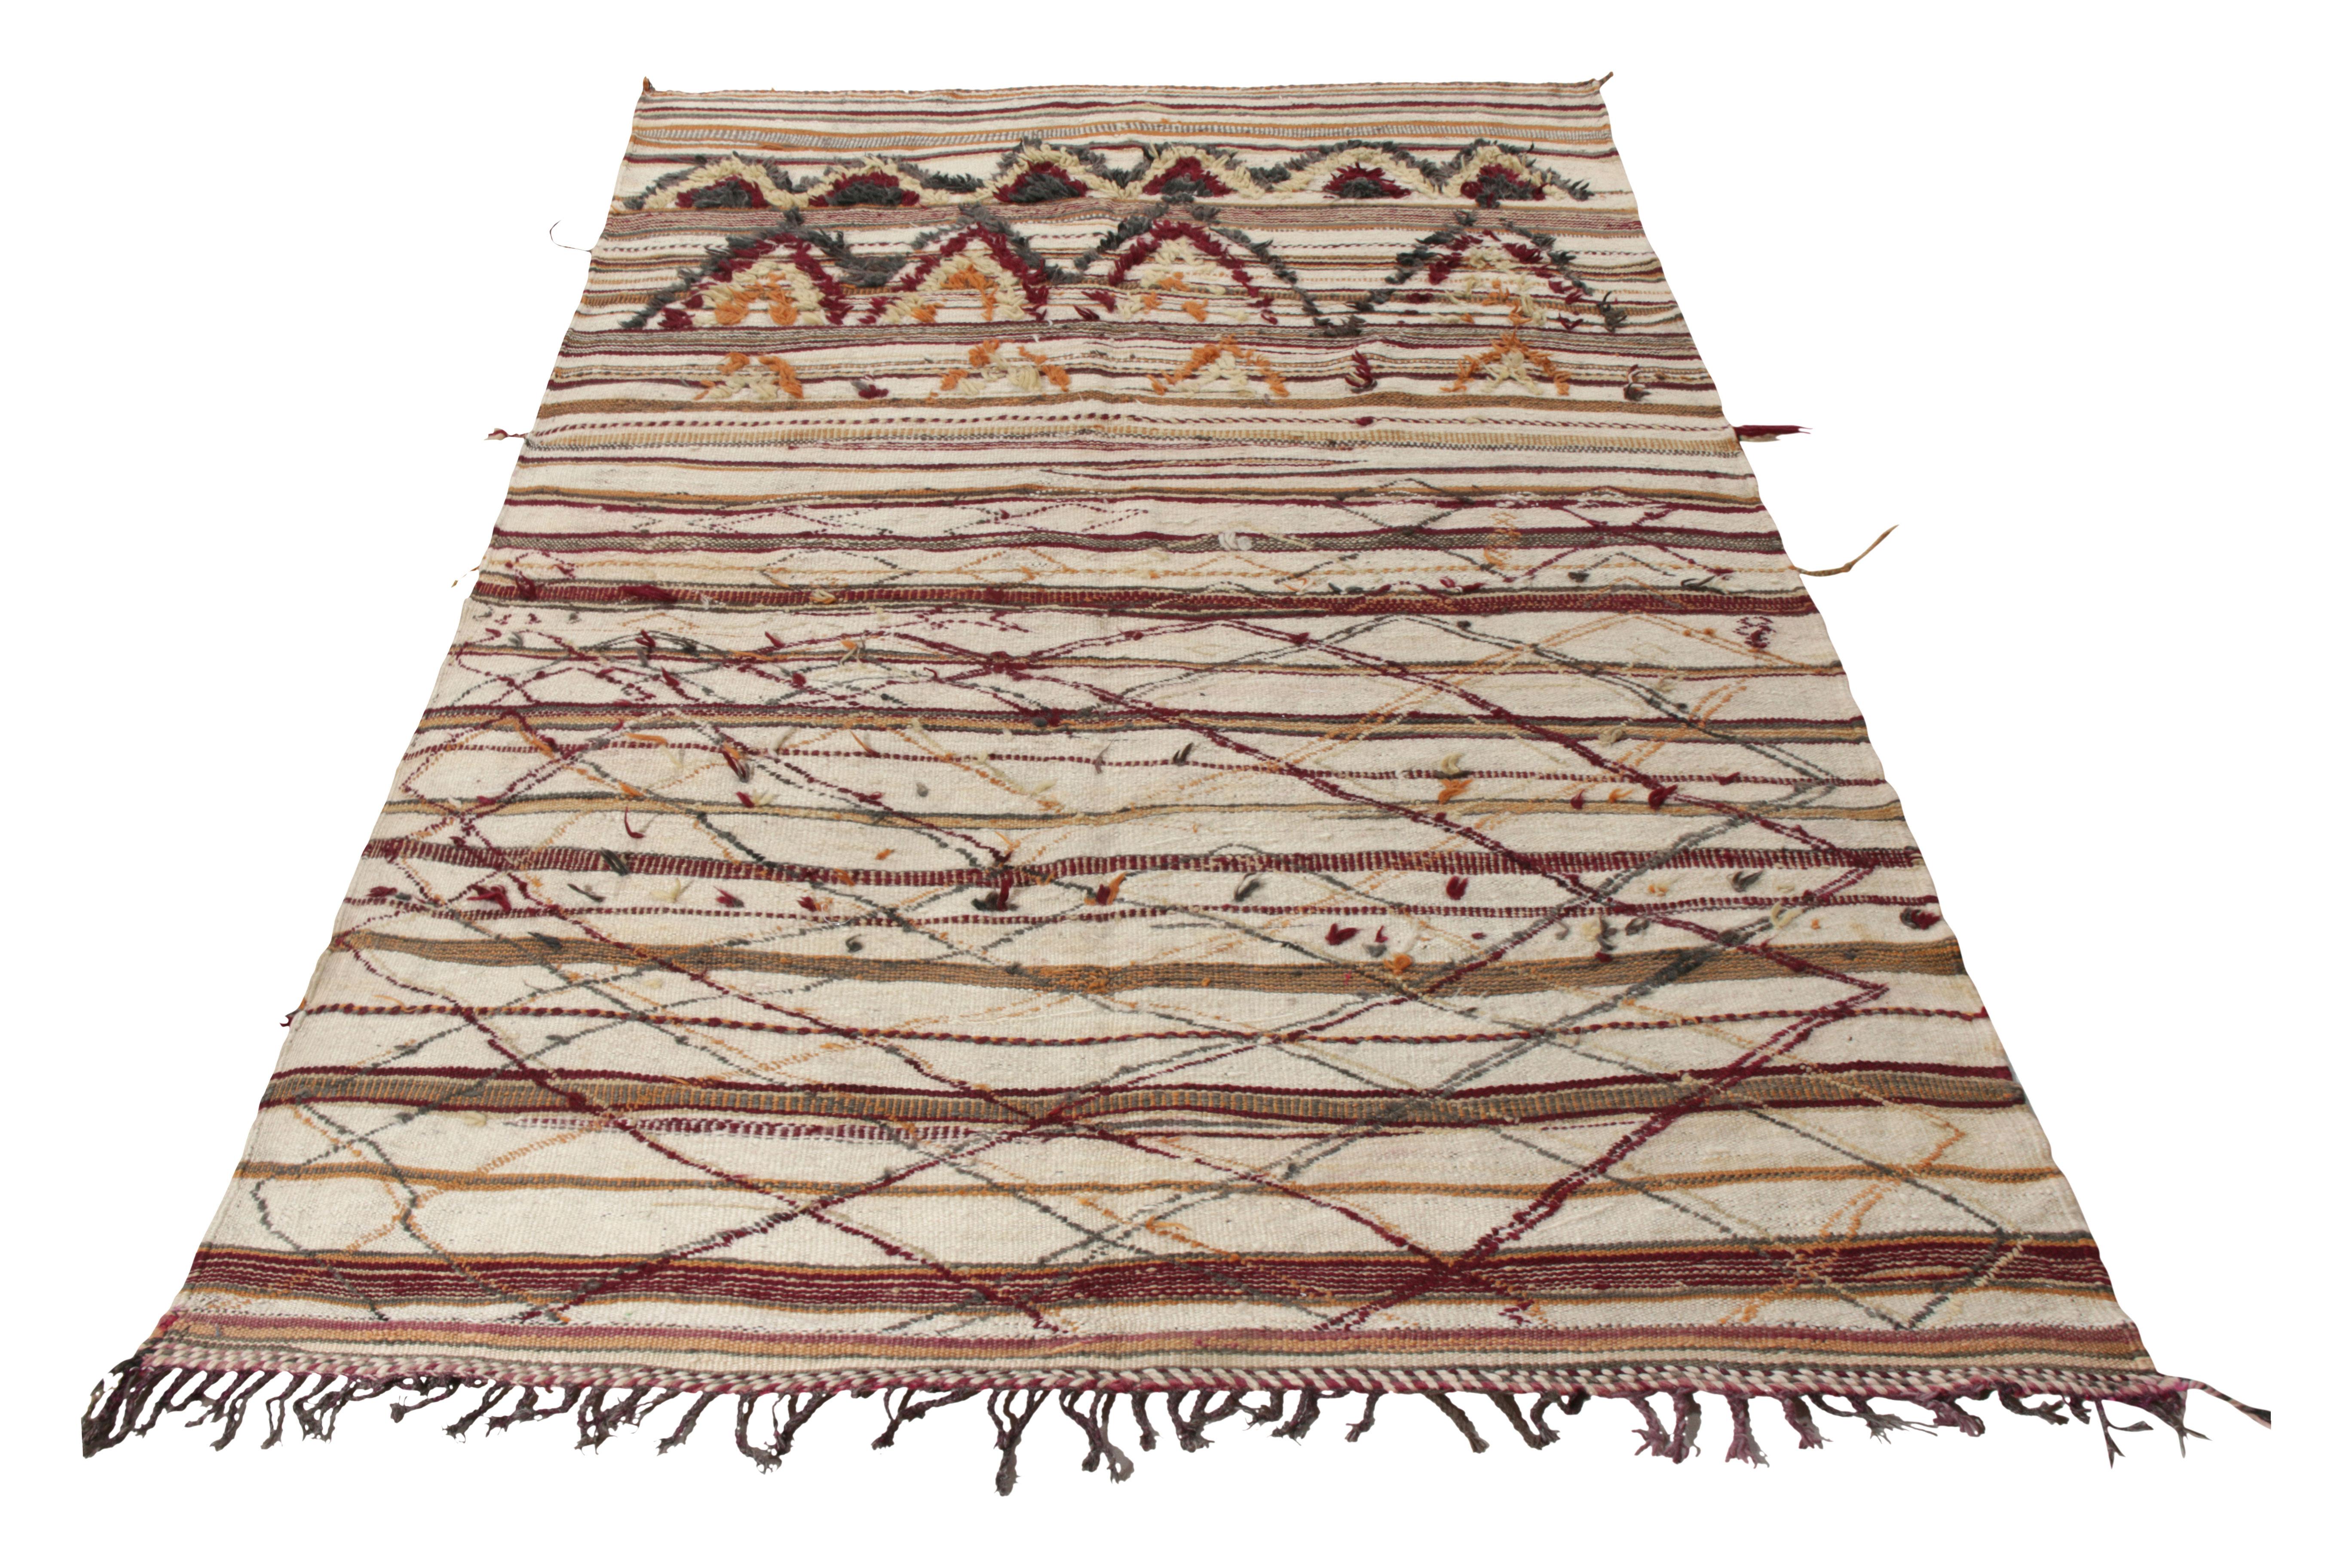 Handwoven in wool circa 1950-1960, a vintage Moroccan Berber Kilim rug joining Rug & Kilim’s titular collection. Covering a 6x10 size of unique textural sensibility, the rug witnesses a dynamic geometric pattern in beige-brown while carrying raw